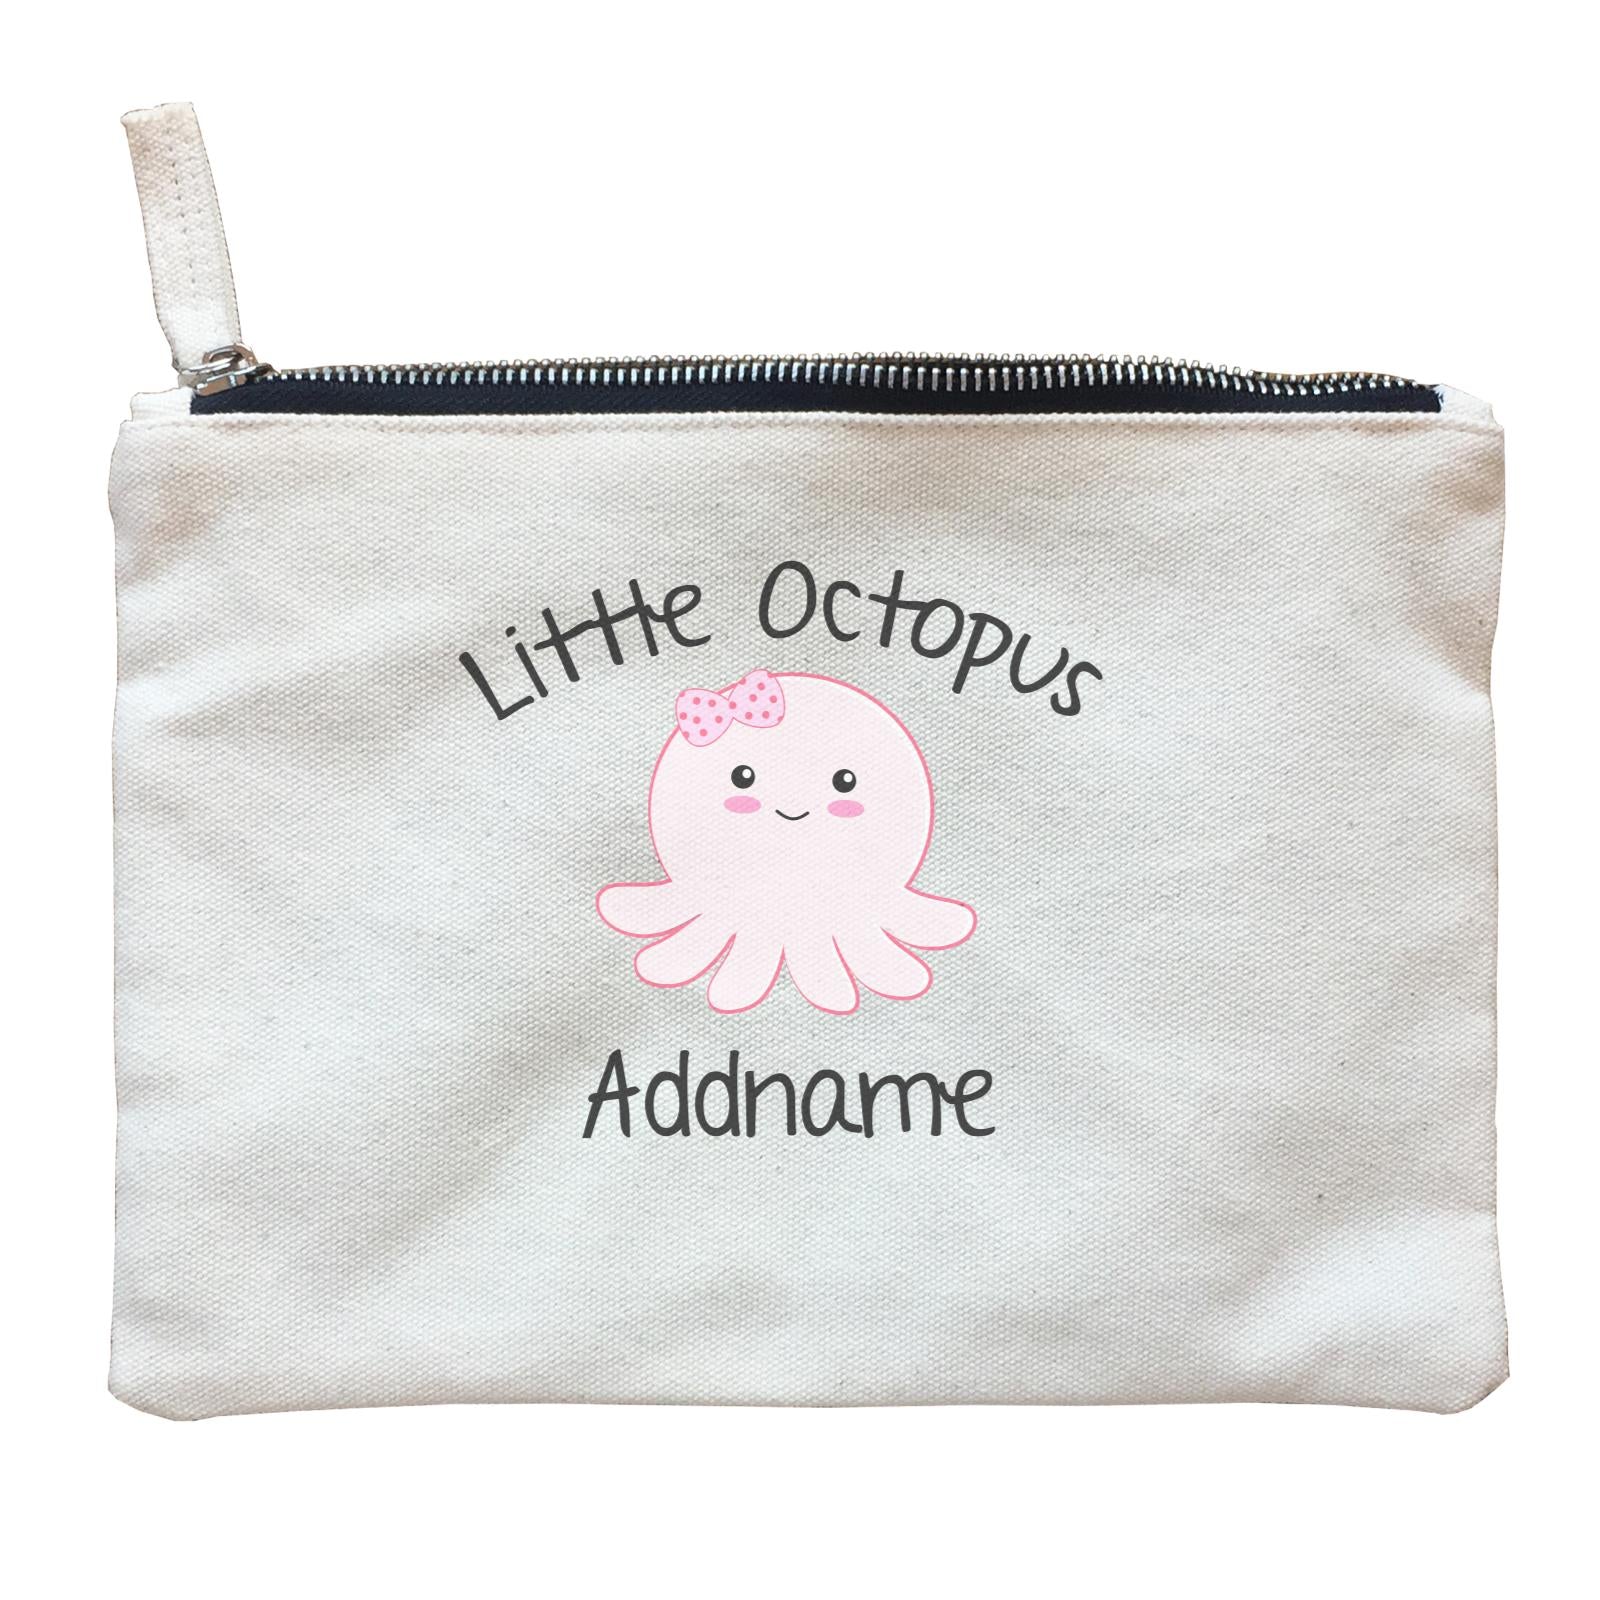 Cute Animals And Friends Series Little Octopus Girl Addname Zipper Pouch